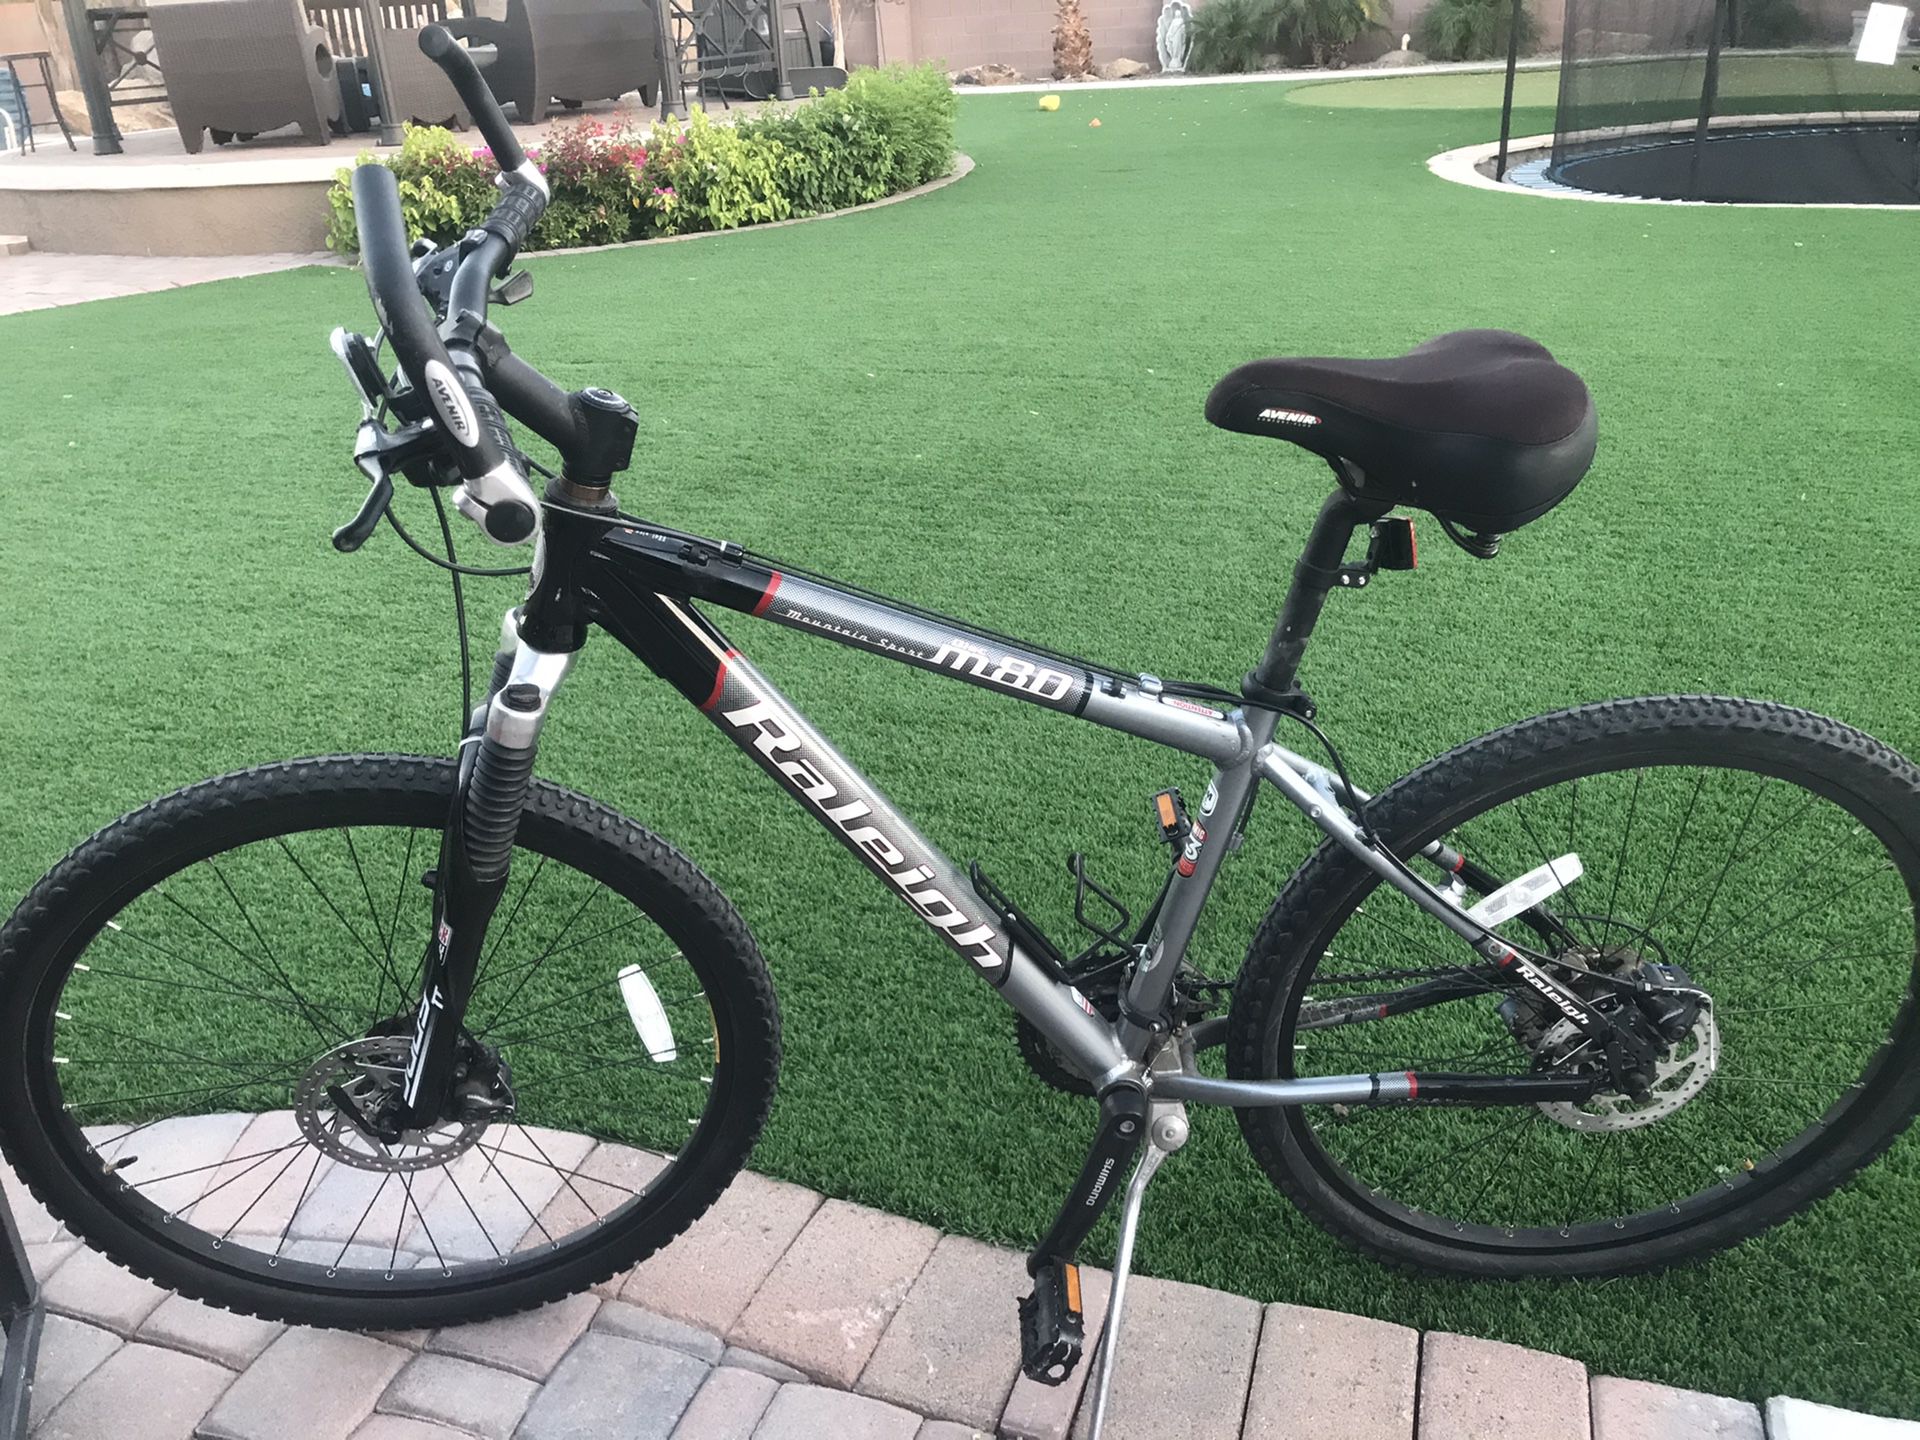 Mountain trail bike 26” wheels dual disc brakes front suspension bike is like new cond